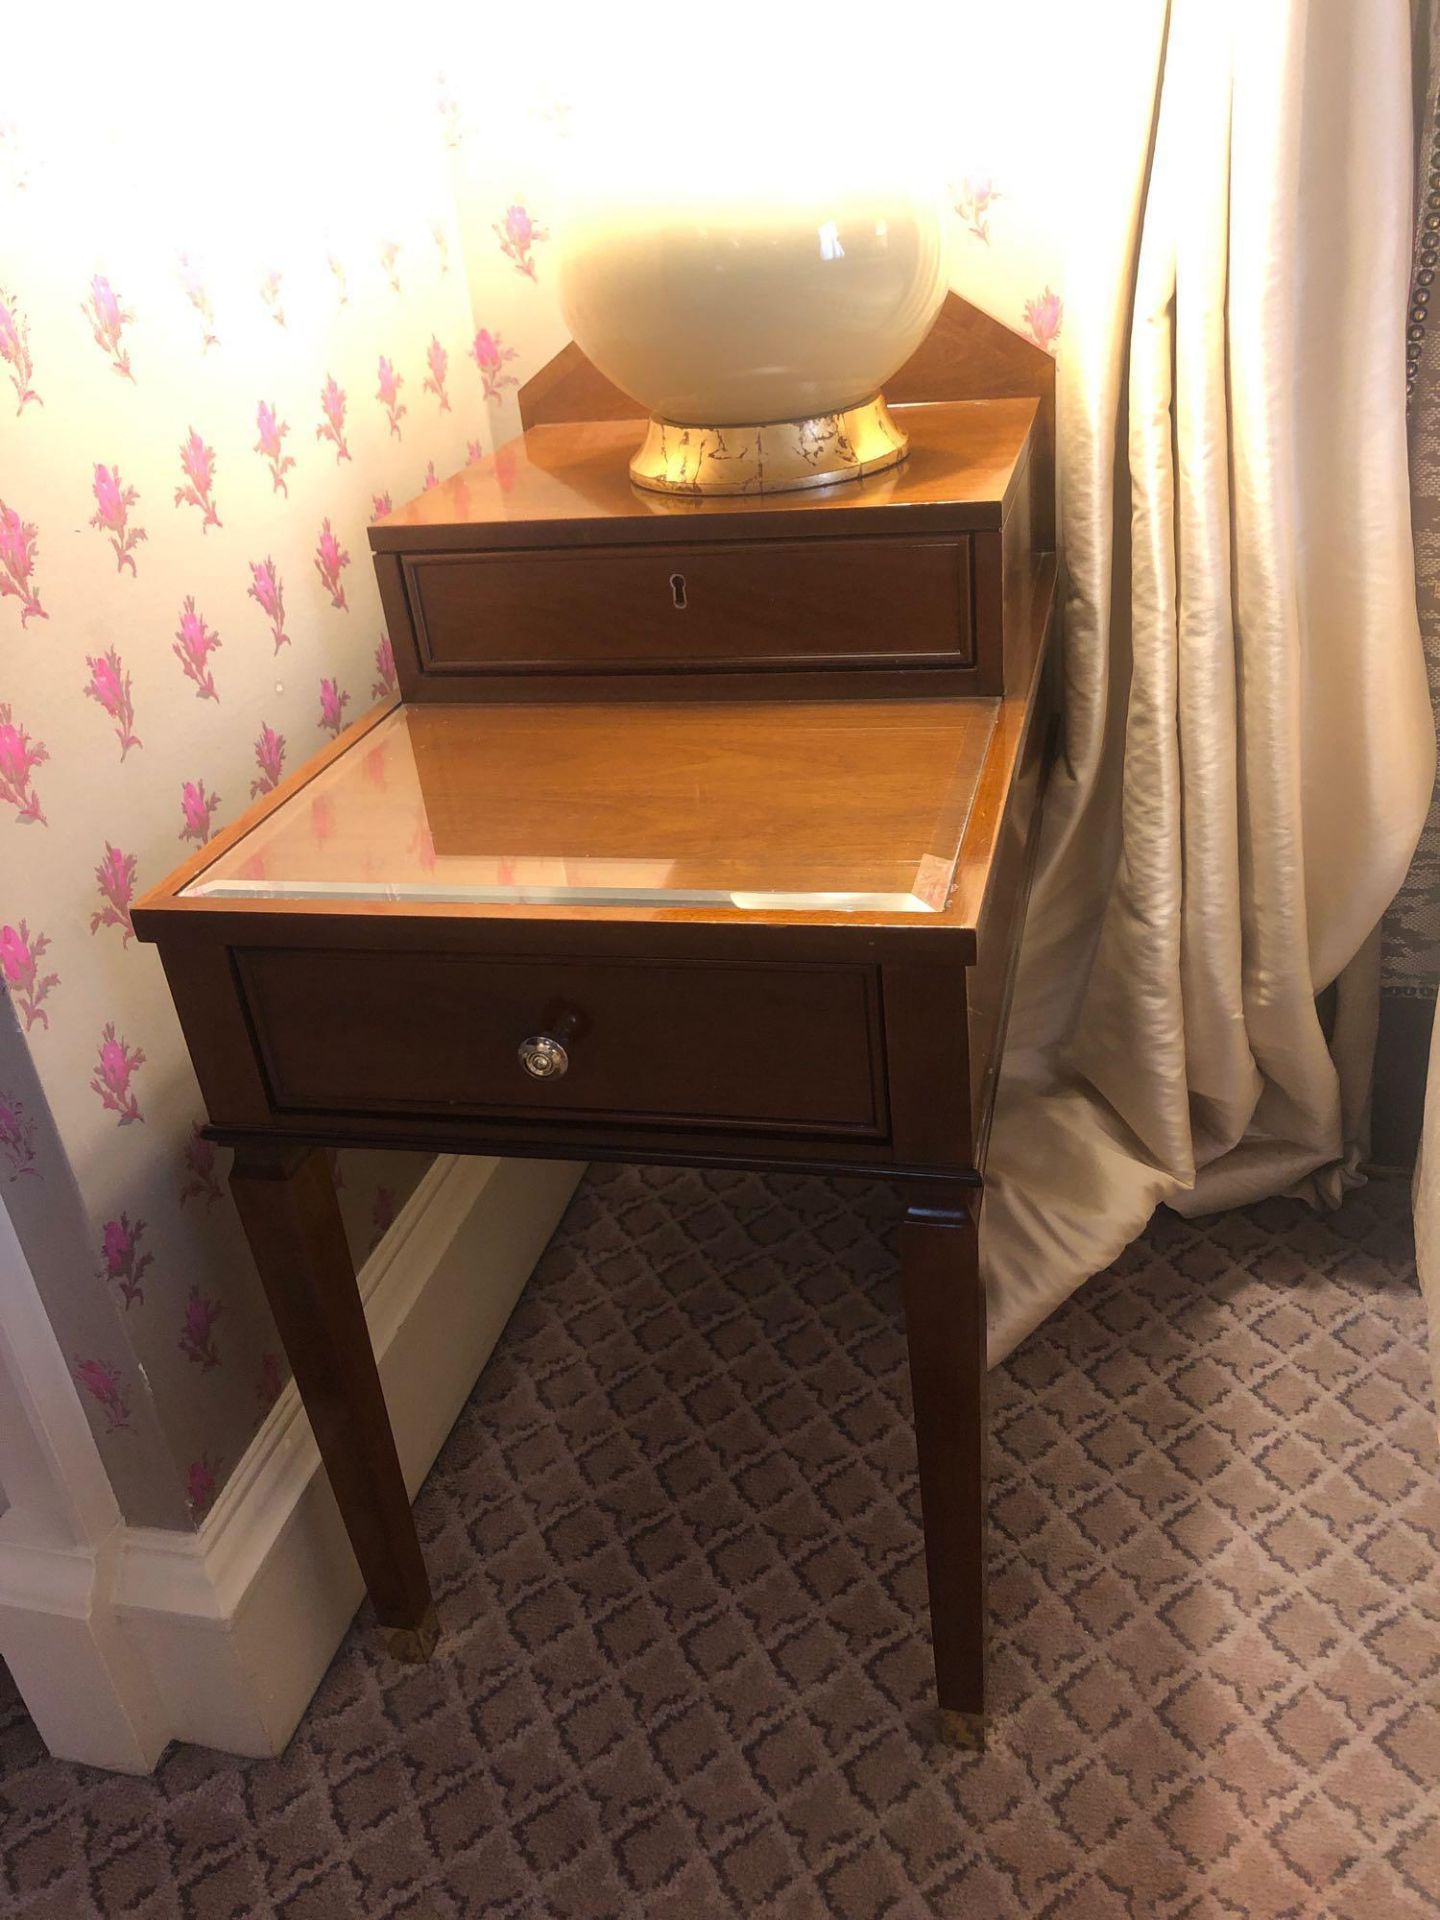 A Pair Of Two Tier Bedside Nightstands With Storage Compartments Mounted On Tapered Legs With